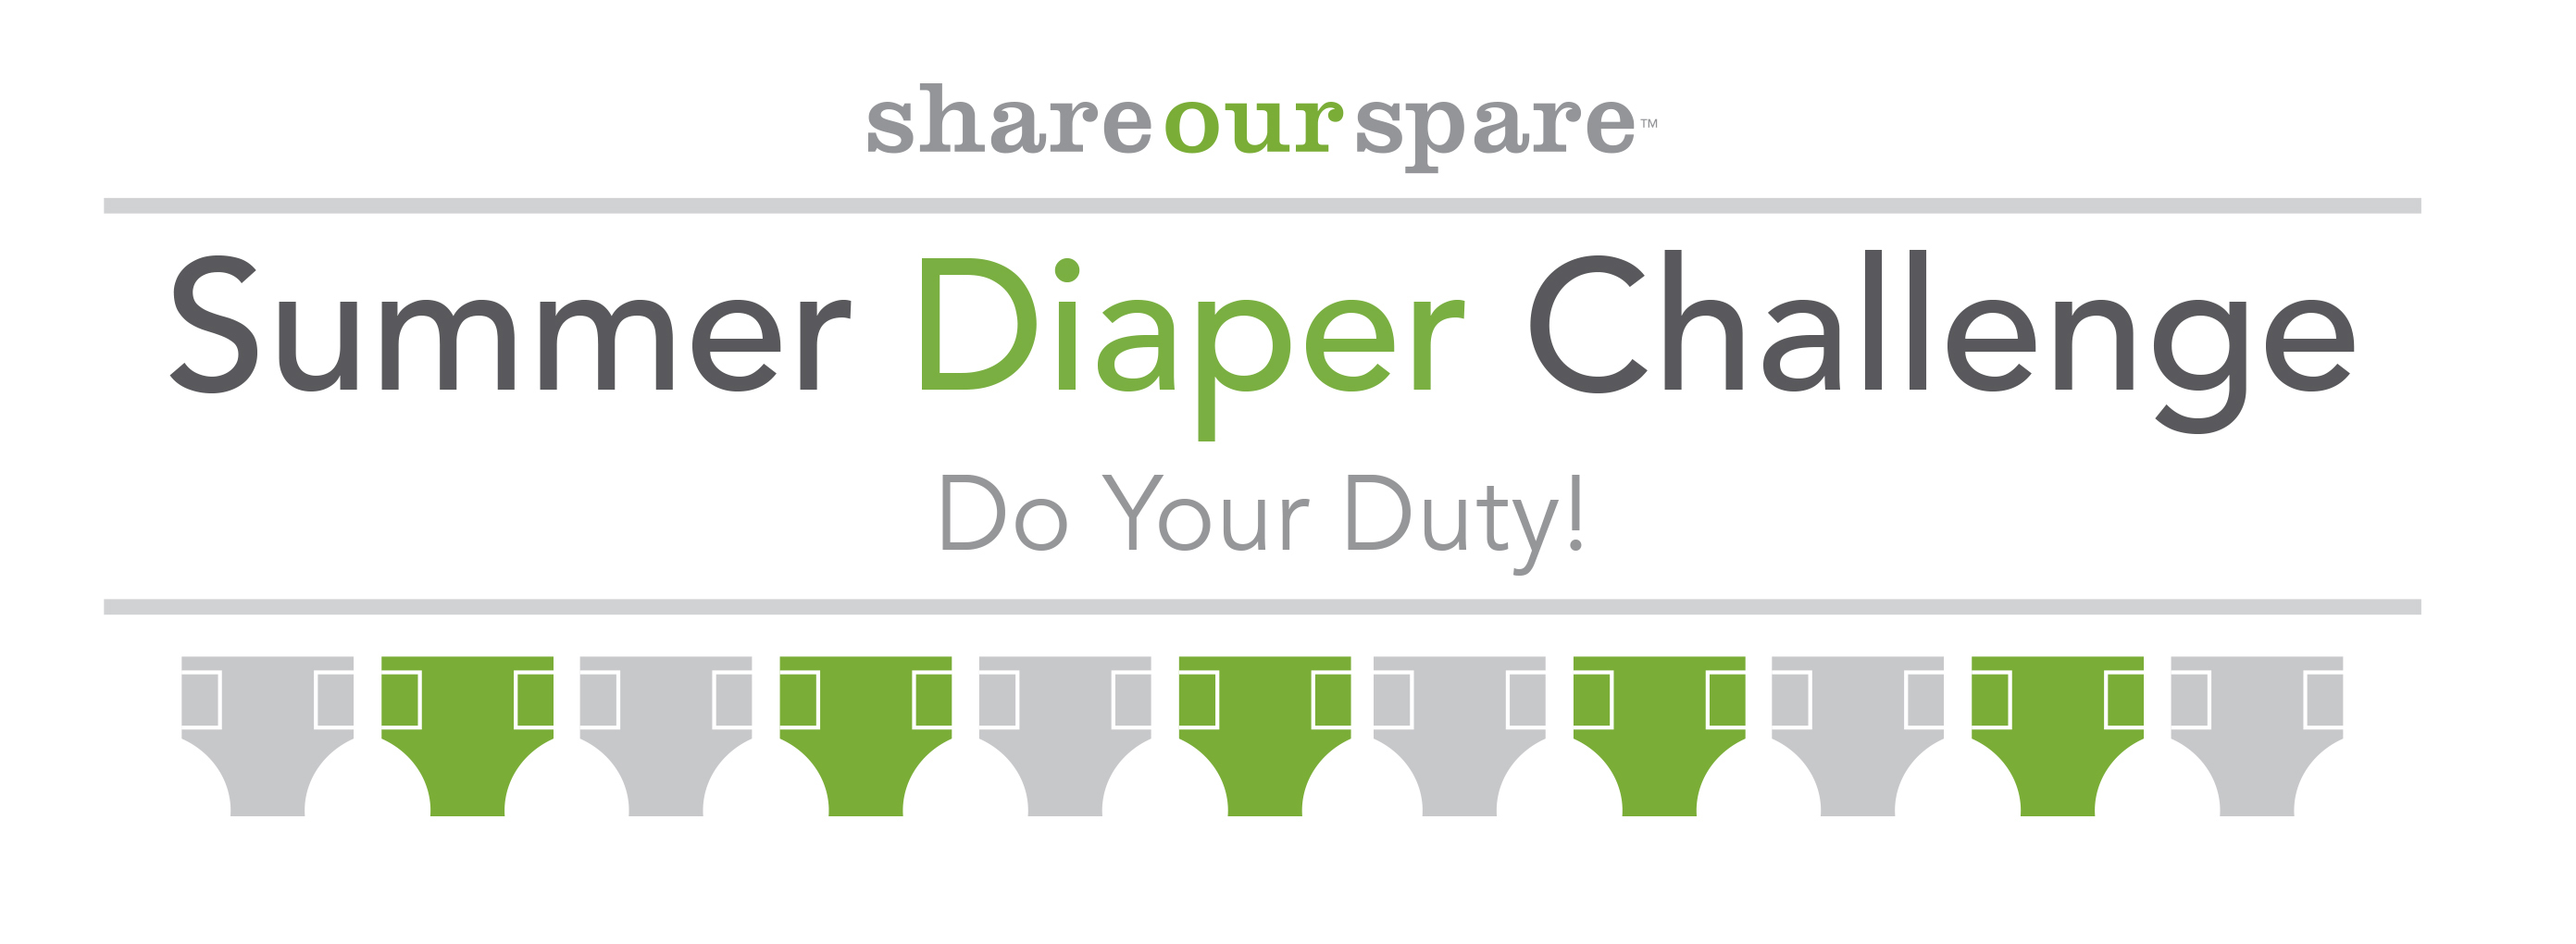 Share Our Spare is launching the Summer Diaper Challenge with the goal of raising 100,000 diapers.